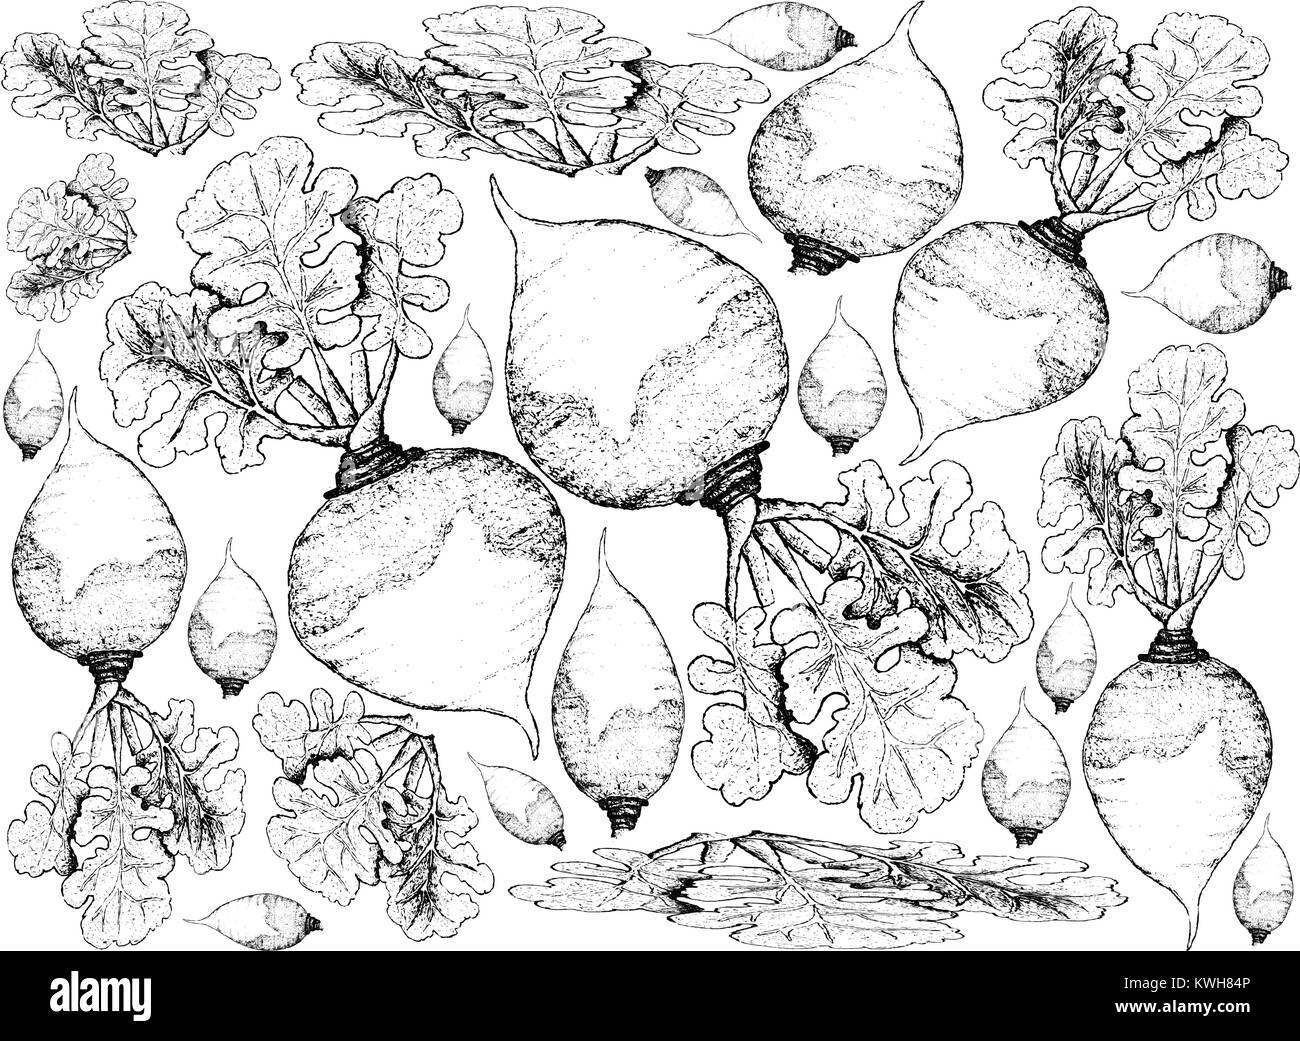 Root and Tuberous Vegetables, Illustration Hand Drawn Sketch of Fresh Rutabaga or Brassica Napus Plants Isolated on White Background. Stock Vector